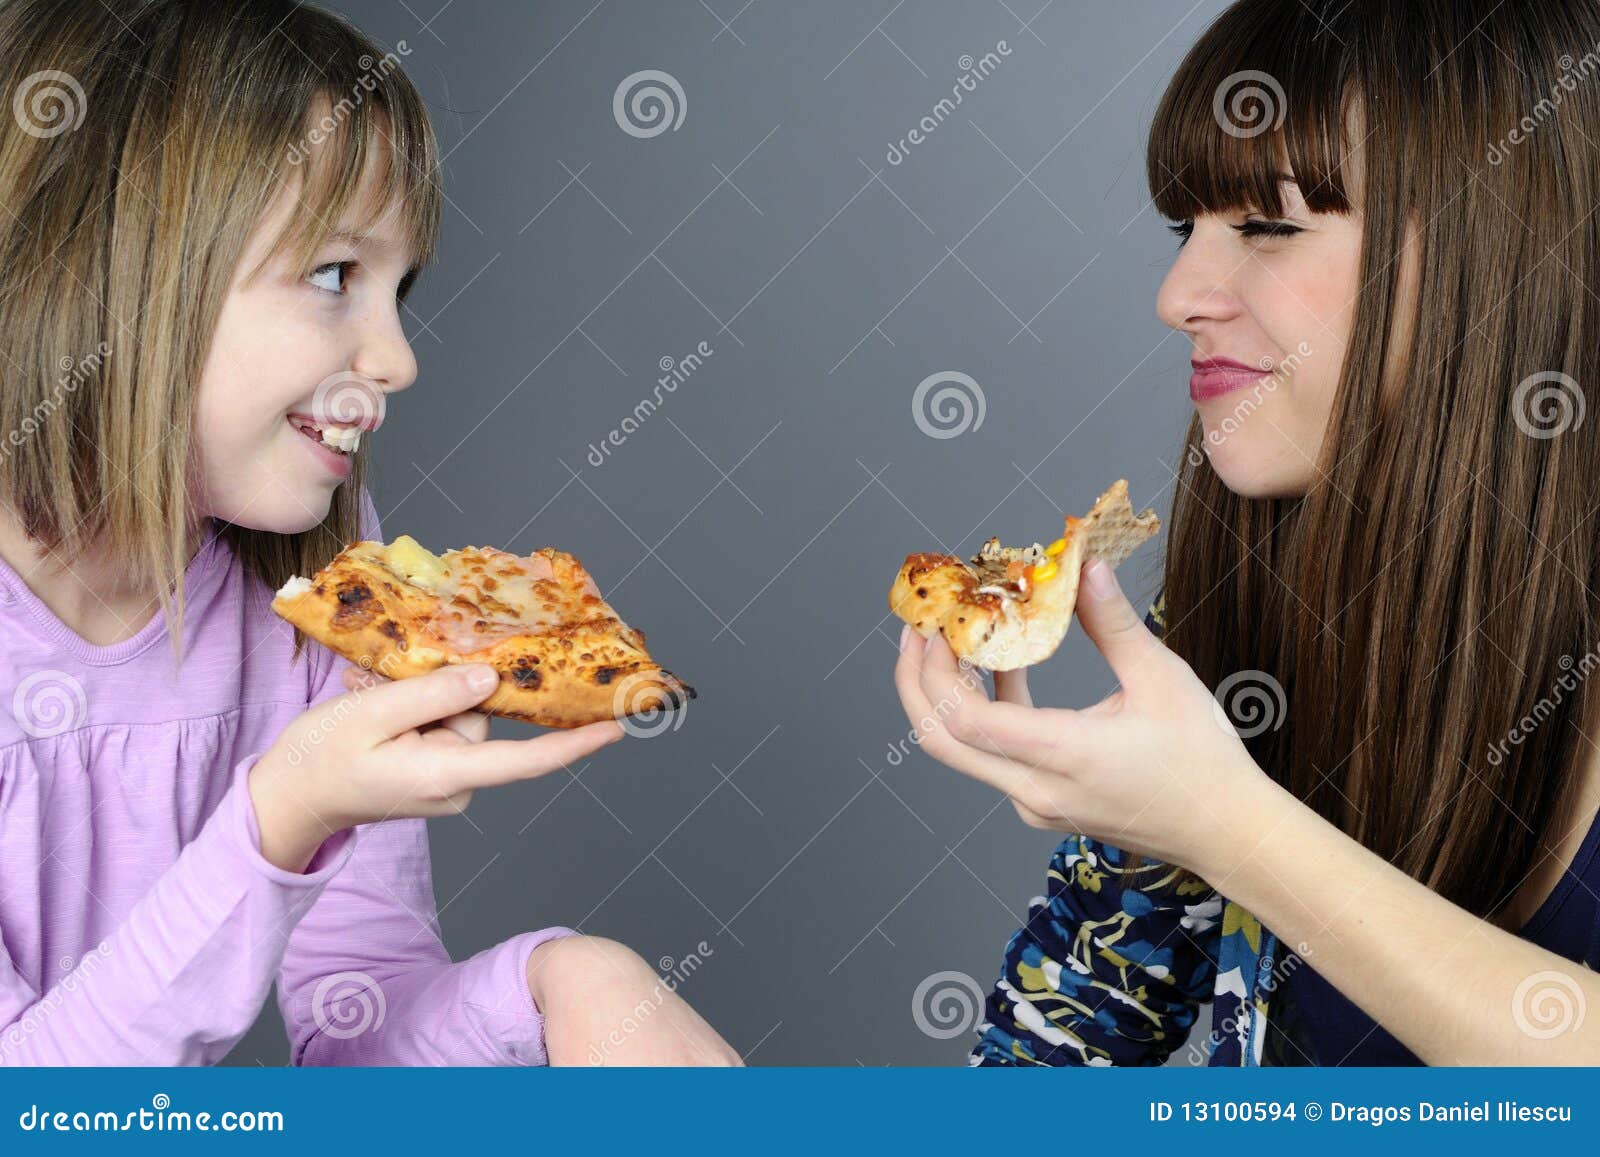 Teens Eating And Having Fun Stock Photo Image Of Acc